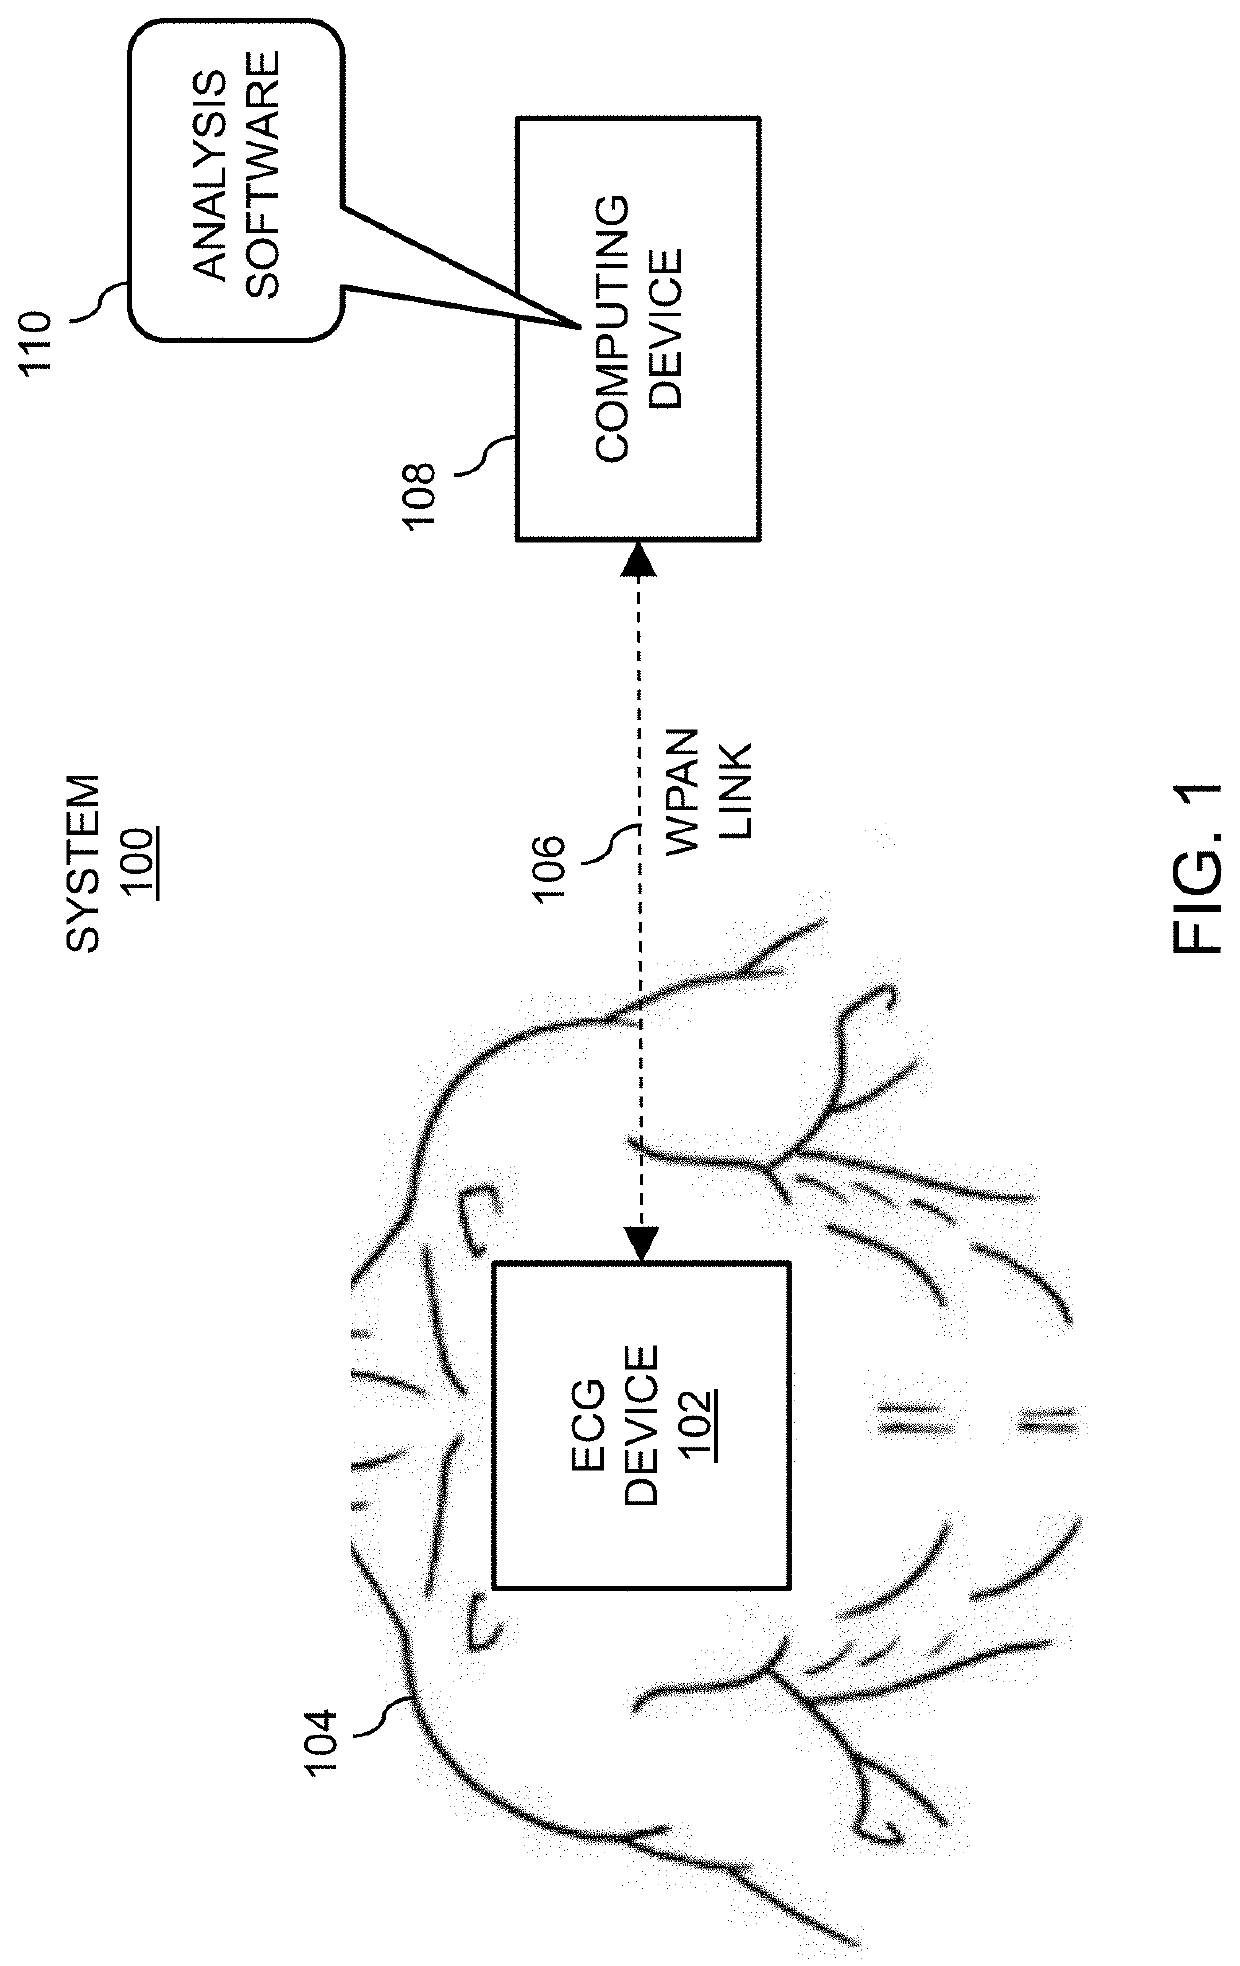 Systems, methods, and devices for determining mild traumatic brain injuries